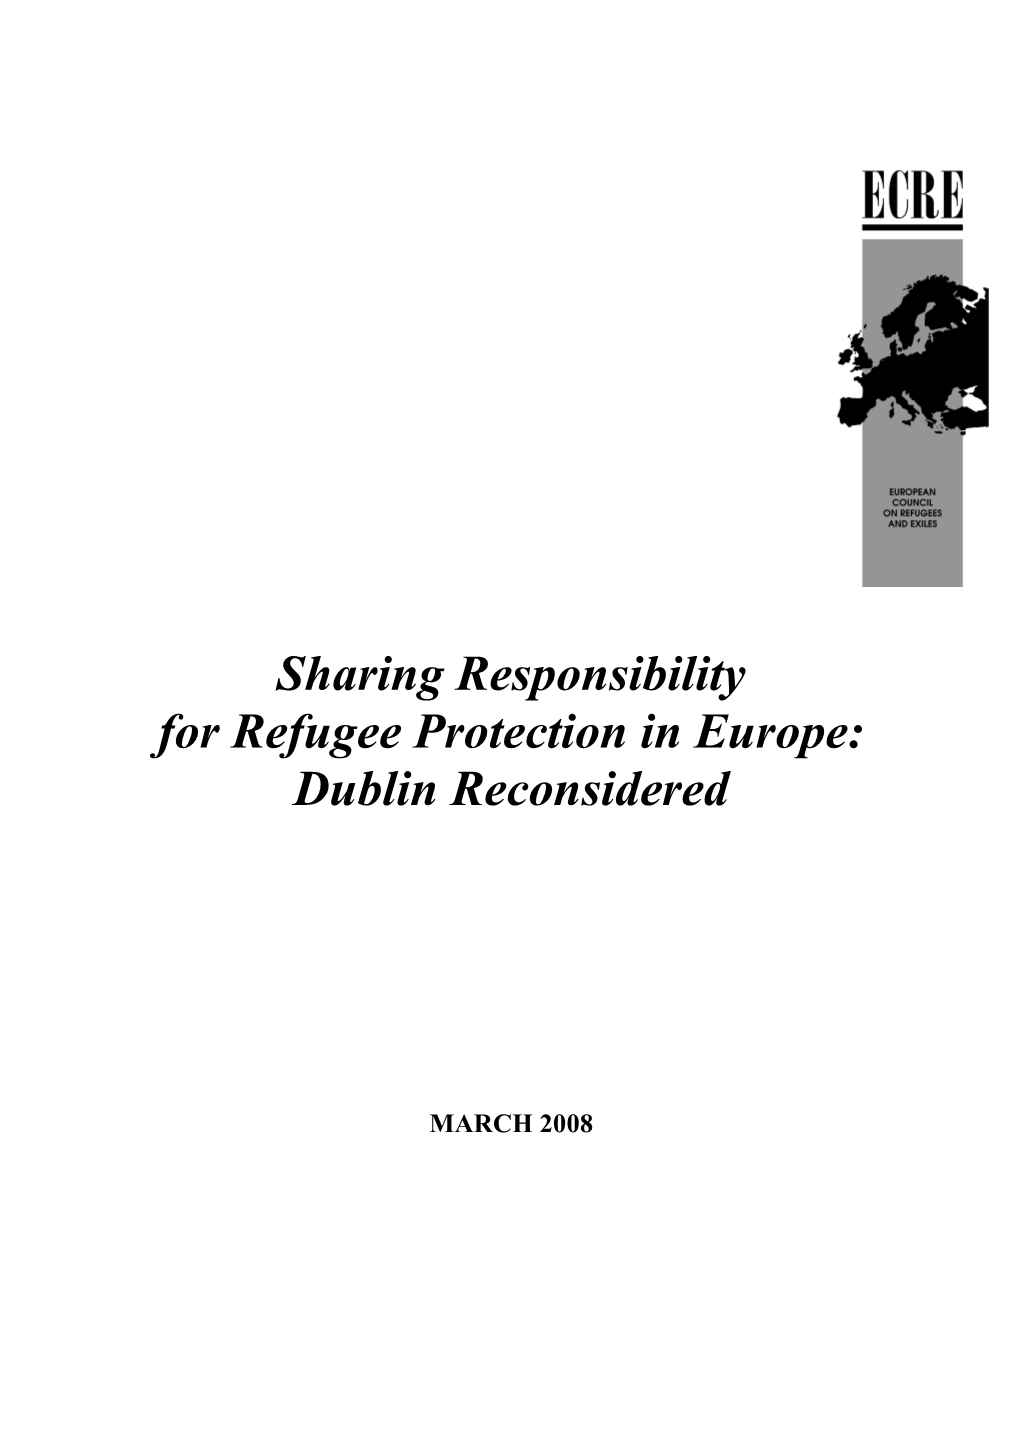 Sharing Responsibility for Refugee Protection in Europe: Dublin Reconsidered